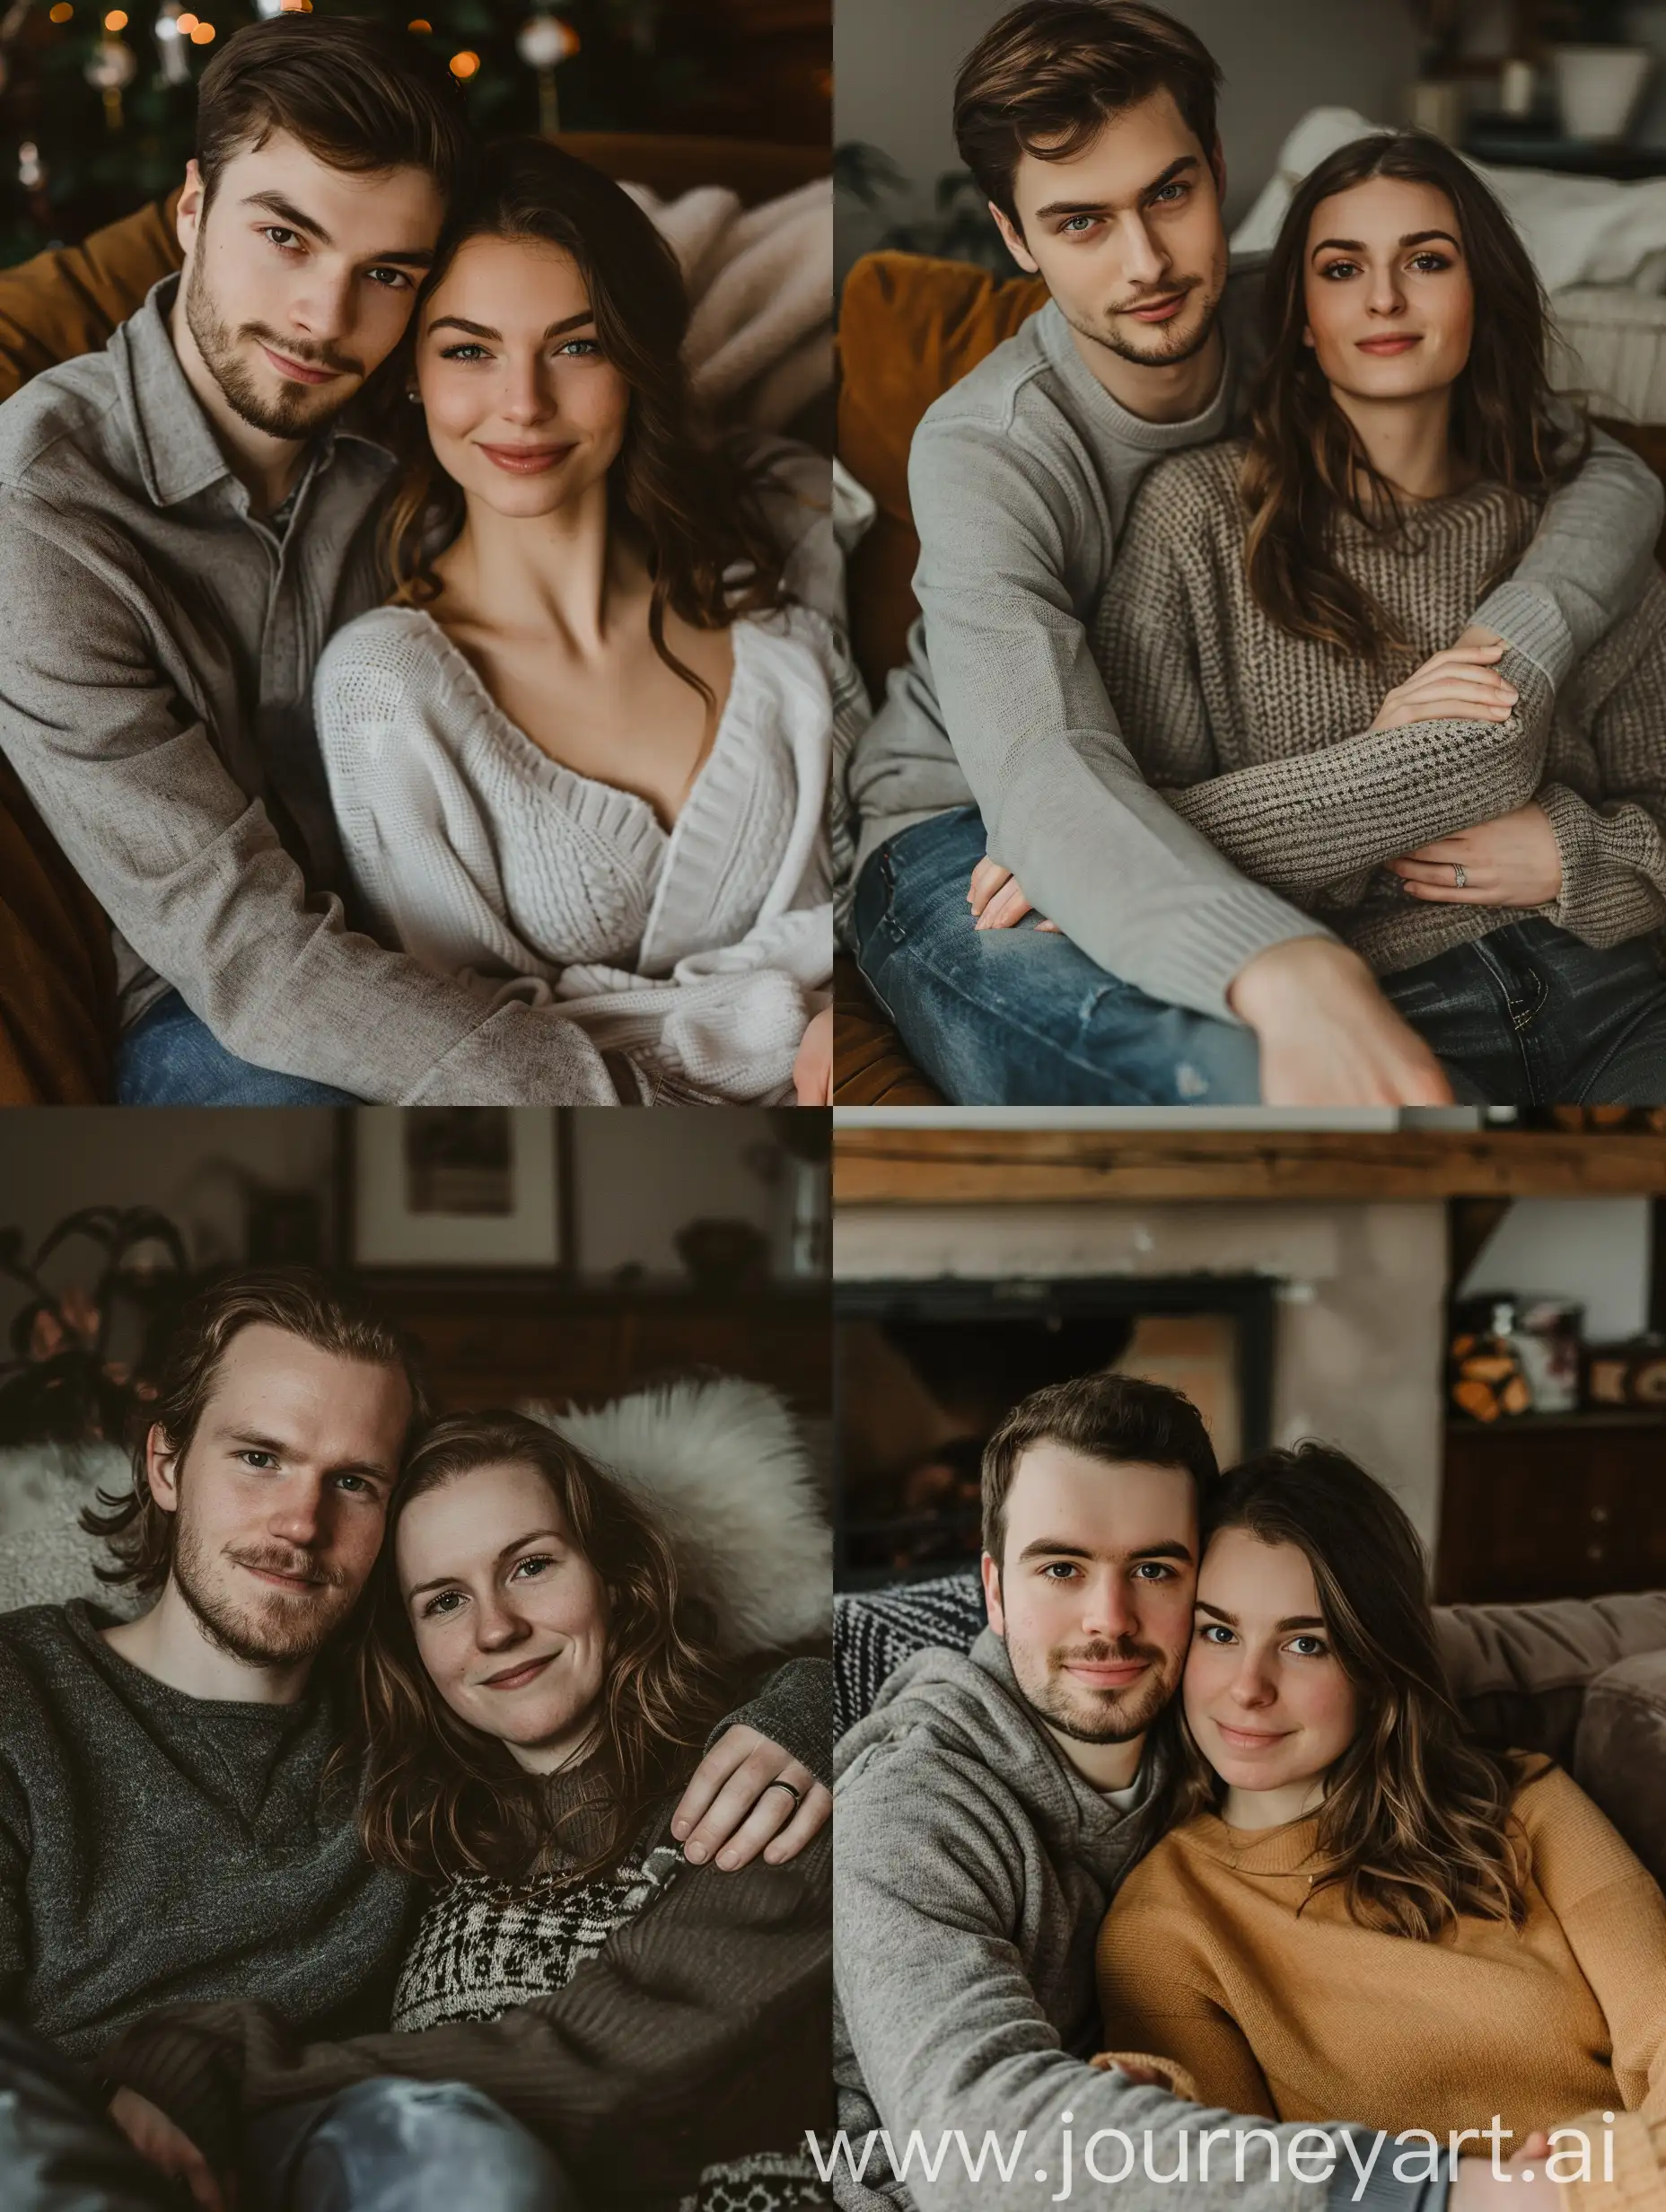 Cozy-Romantic-Couple-Sitting-on-Sofa-Smiling-at-Camera